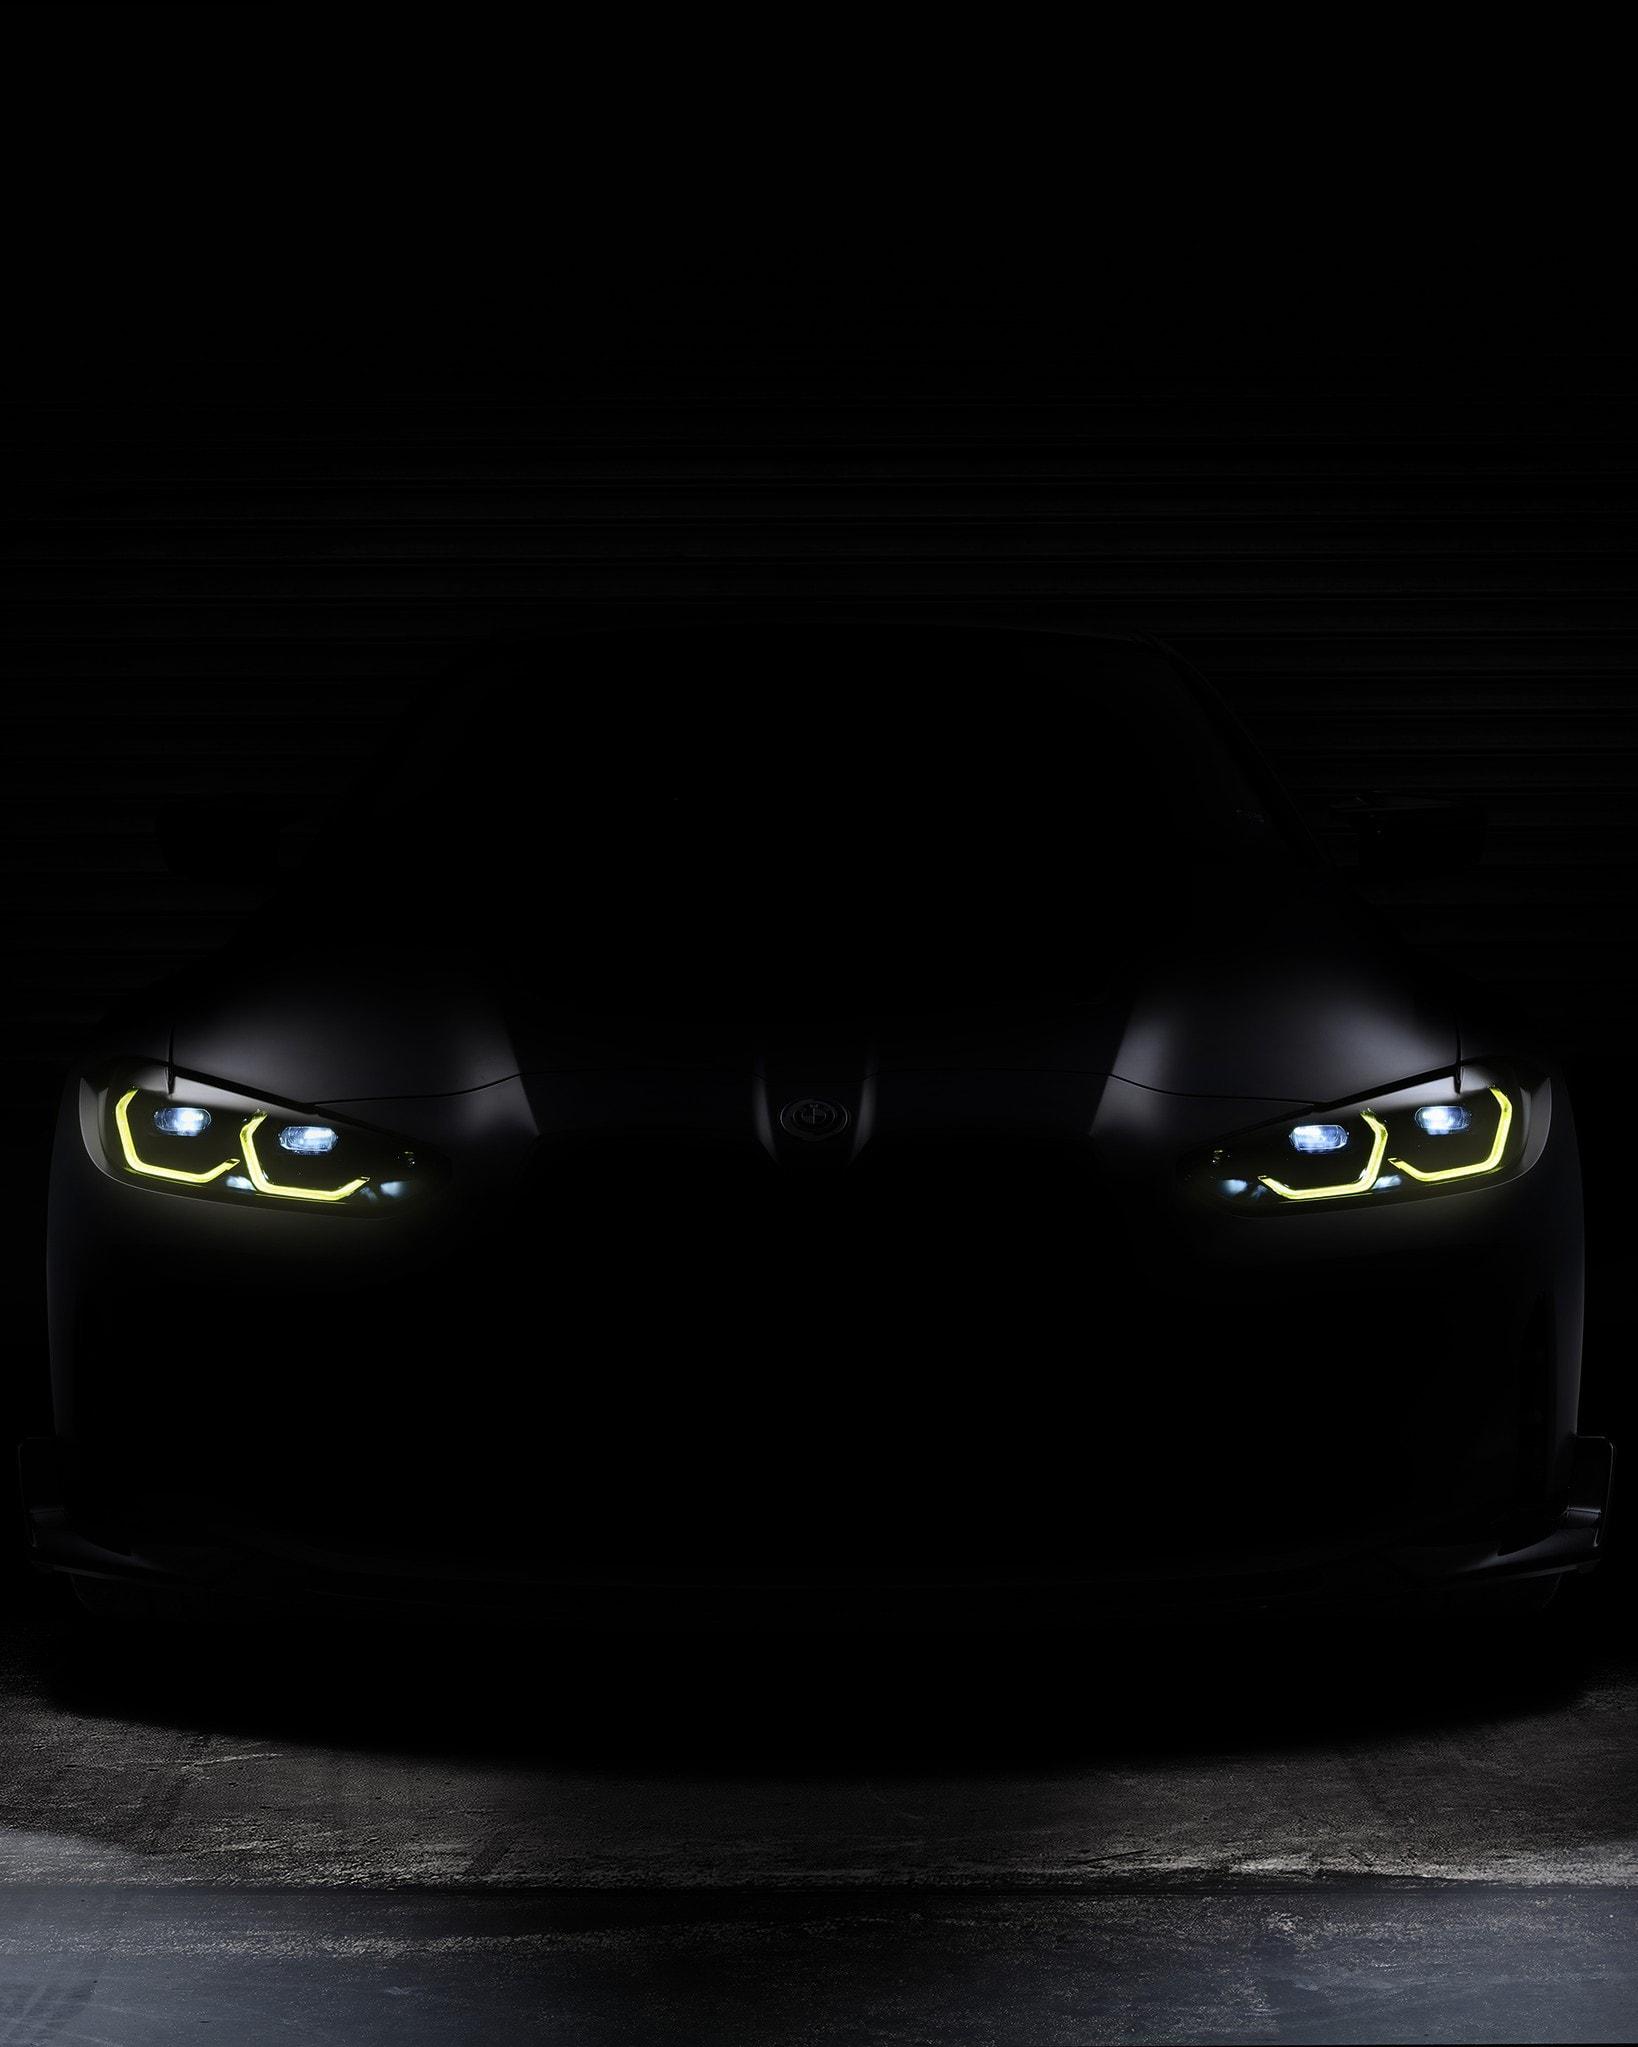 Bmw M4 Csl Teased With New Headlights And Taillights